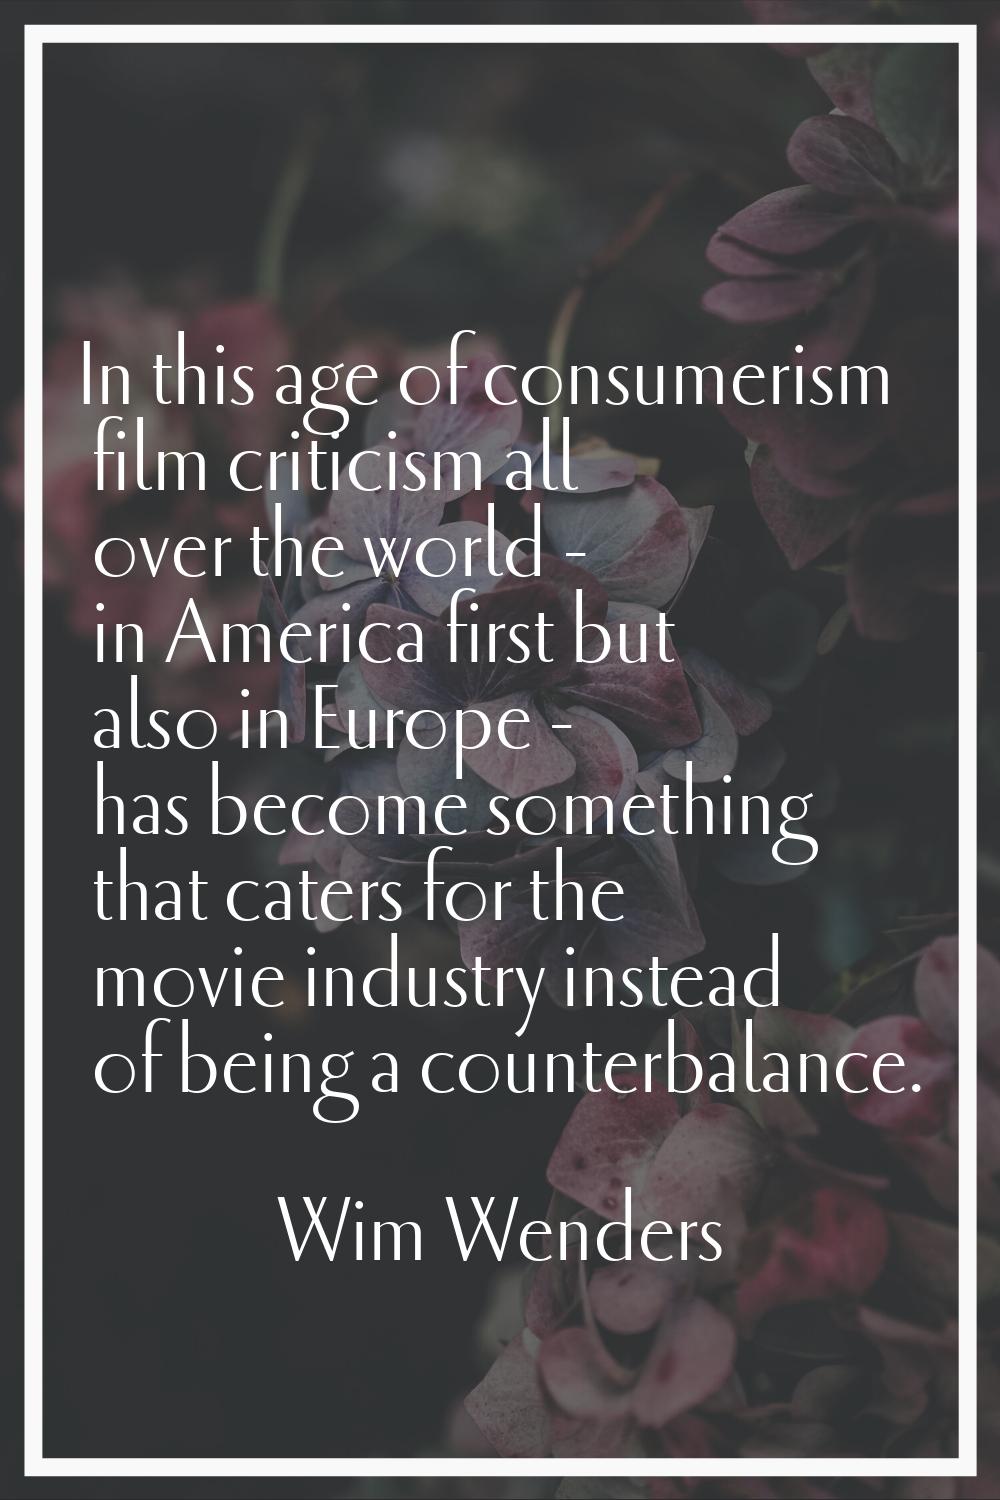 In this age of consumerism film criticism all over the world - in America first but also in Europe 